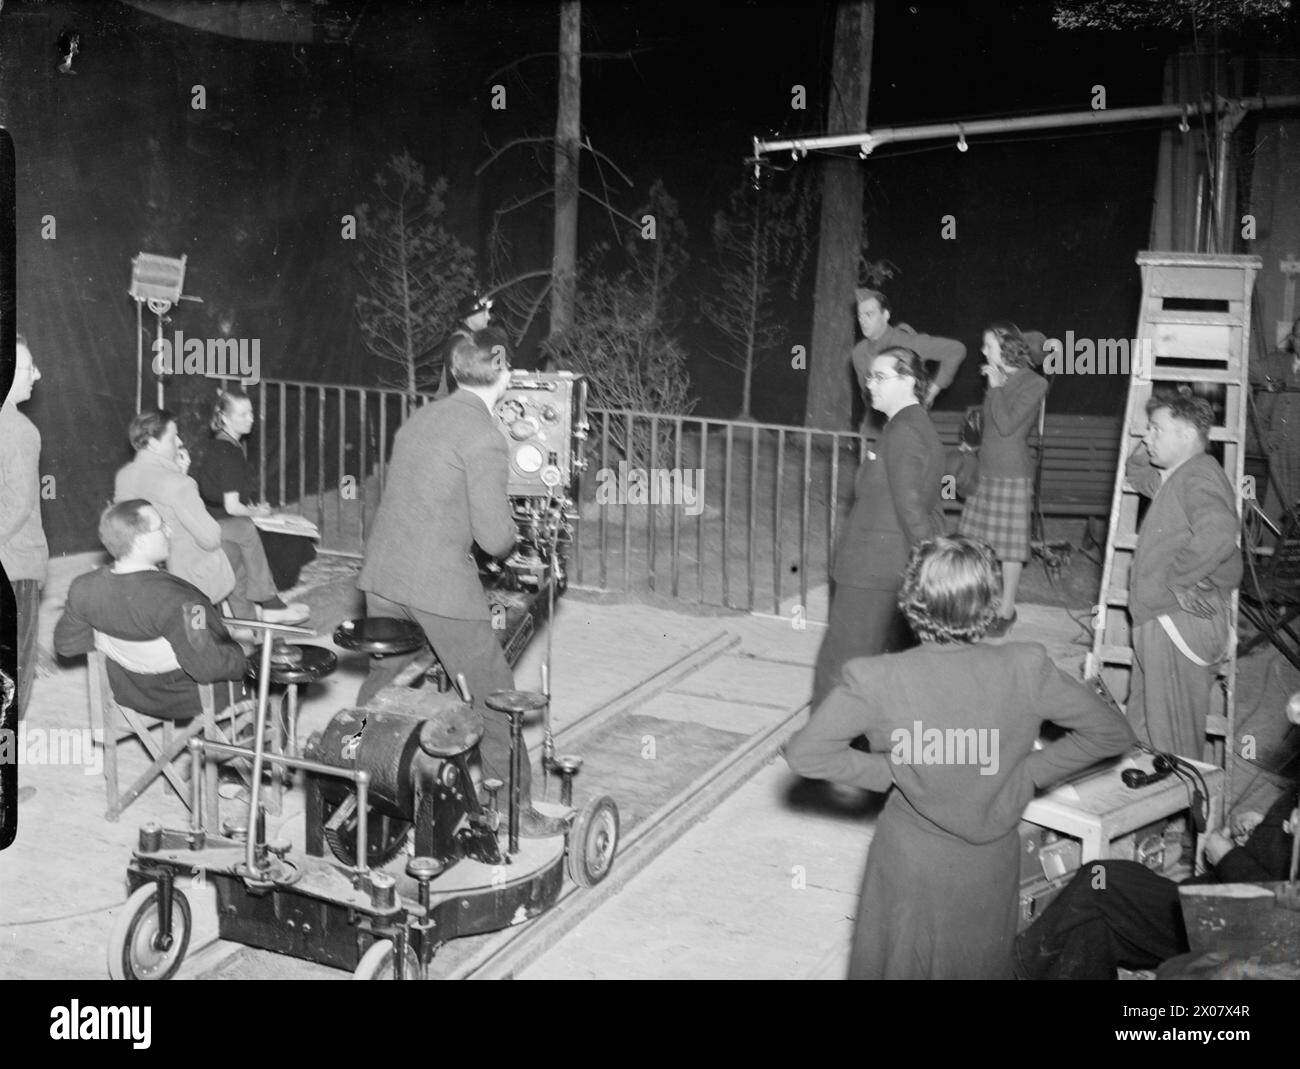 FOOTSTEPS IN THE NIGHT: THE PRODUCTION OF A MINISTRY OF INFORMATION FILM AT ELSTREE STUDIOS, ELSTREE, HERTFORDSHIRE, ENGLAND, UK, MAY 1941 - A scene on set taken during the production of a Ministry of Information film, released as 'Night Watch', starring Anne Firth as Sally and Cyril Chamberlain as Bill. The film was directed by Donald Taylor and made by the Strand Film Company for the Ministry of Information at Elstree Studios. Anne Firth and Cyril Chamberlain can be clearly seen beside a park bench in the right background. The camera and various members of the production team are clearly vis Stock Photo